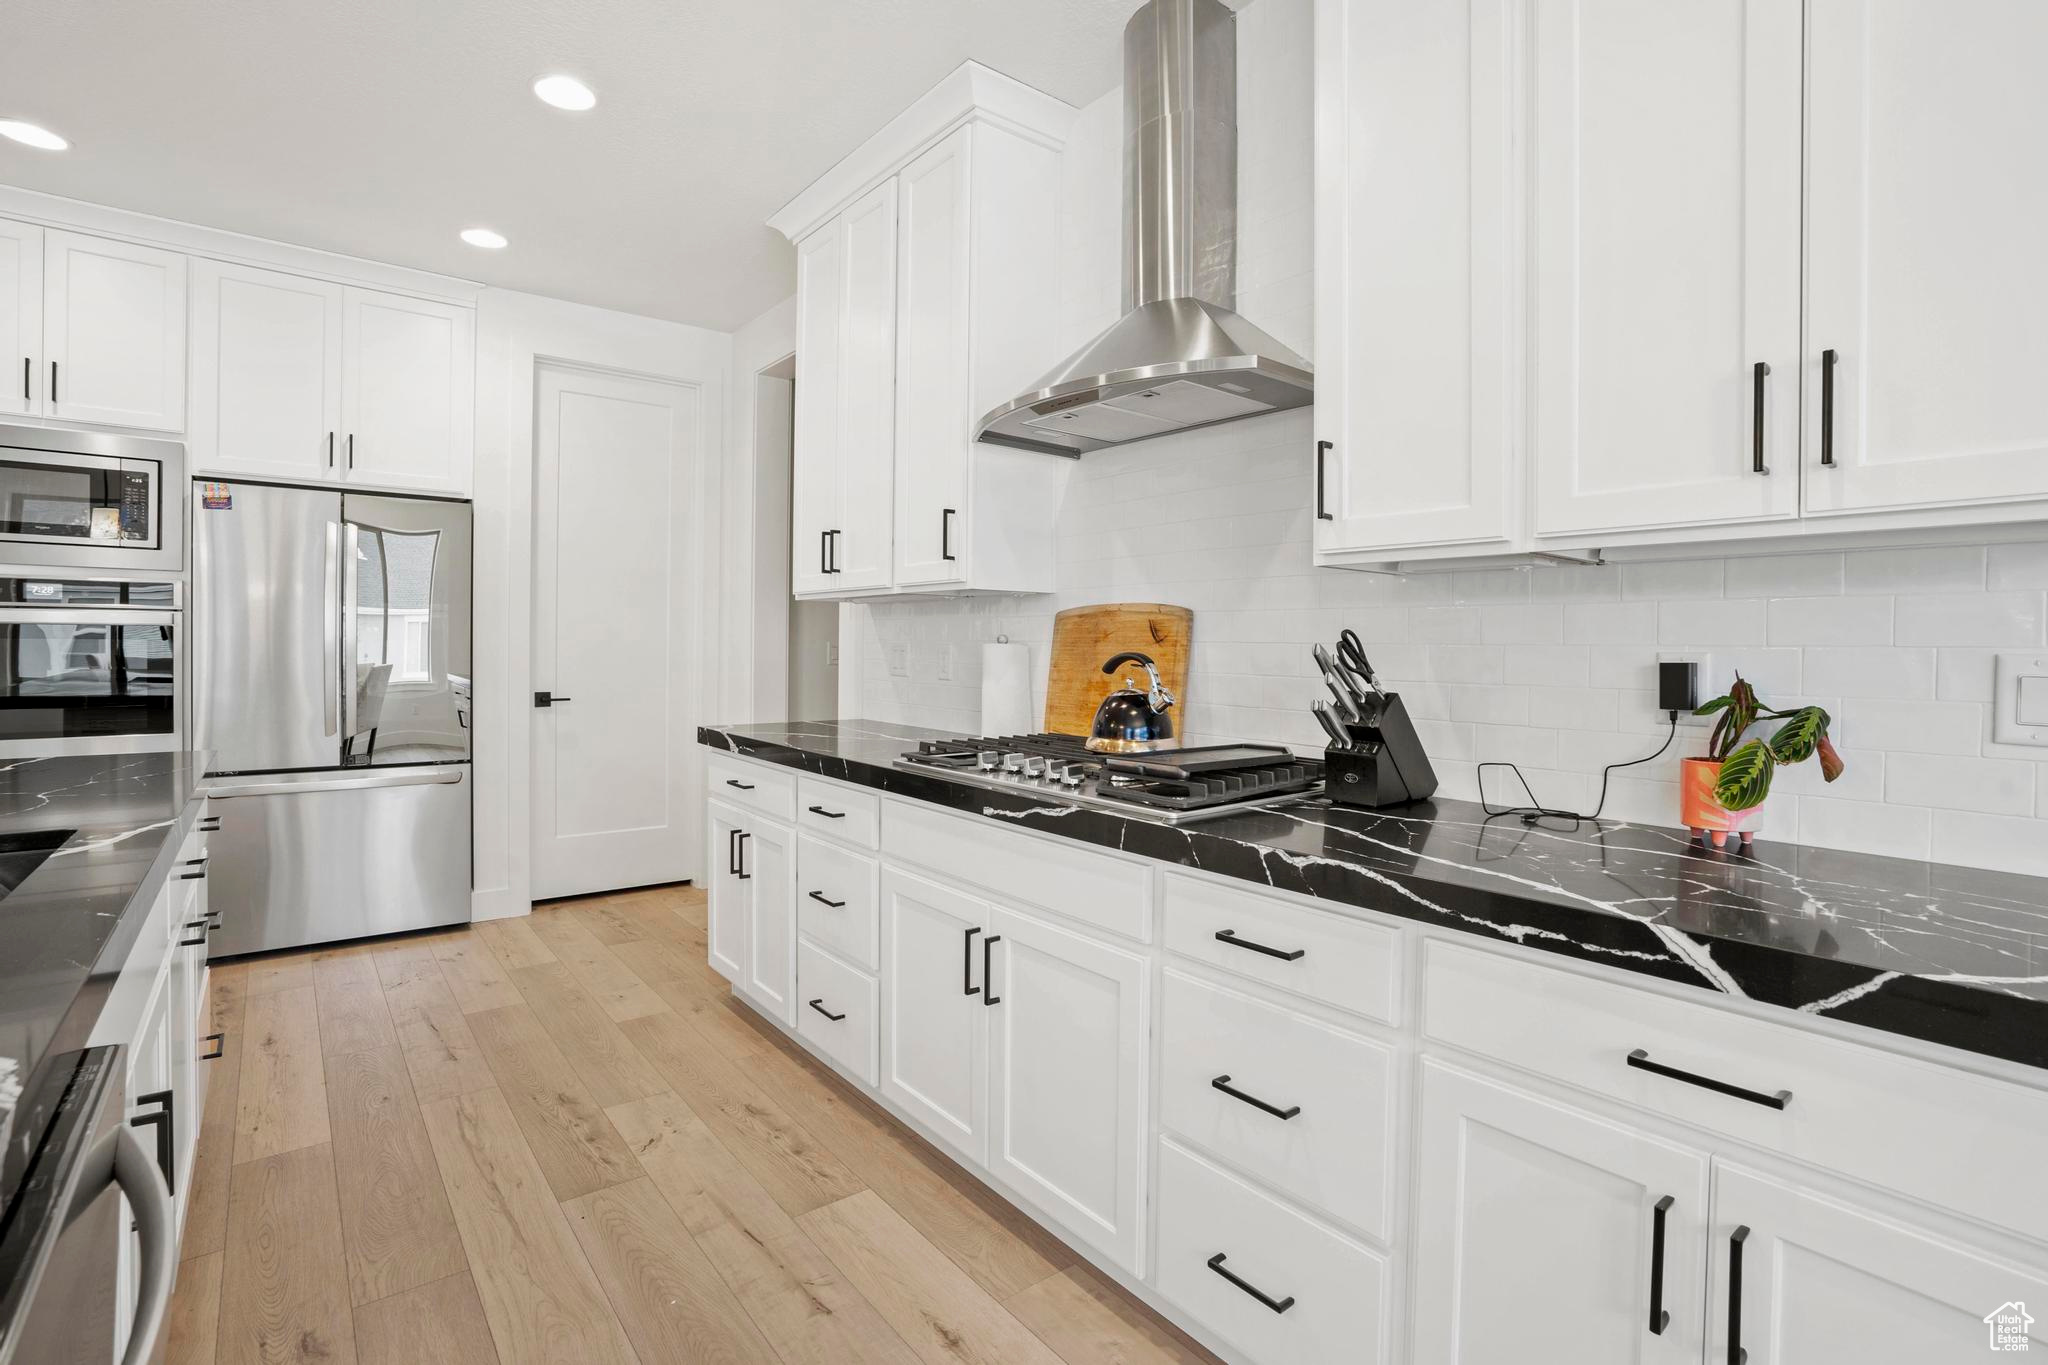 Kitchen featuring tasteful backsplash, white cabinets, stainless steel appliances, light hardwood / wood-style flooring, and wall chimney exhaust hood